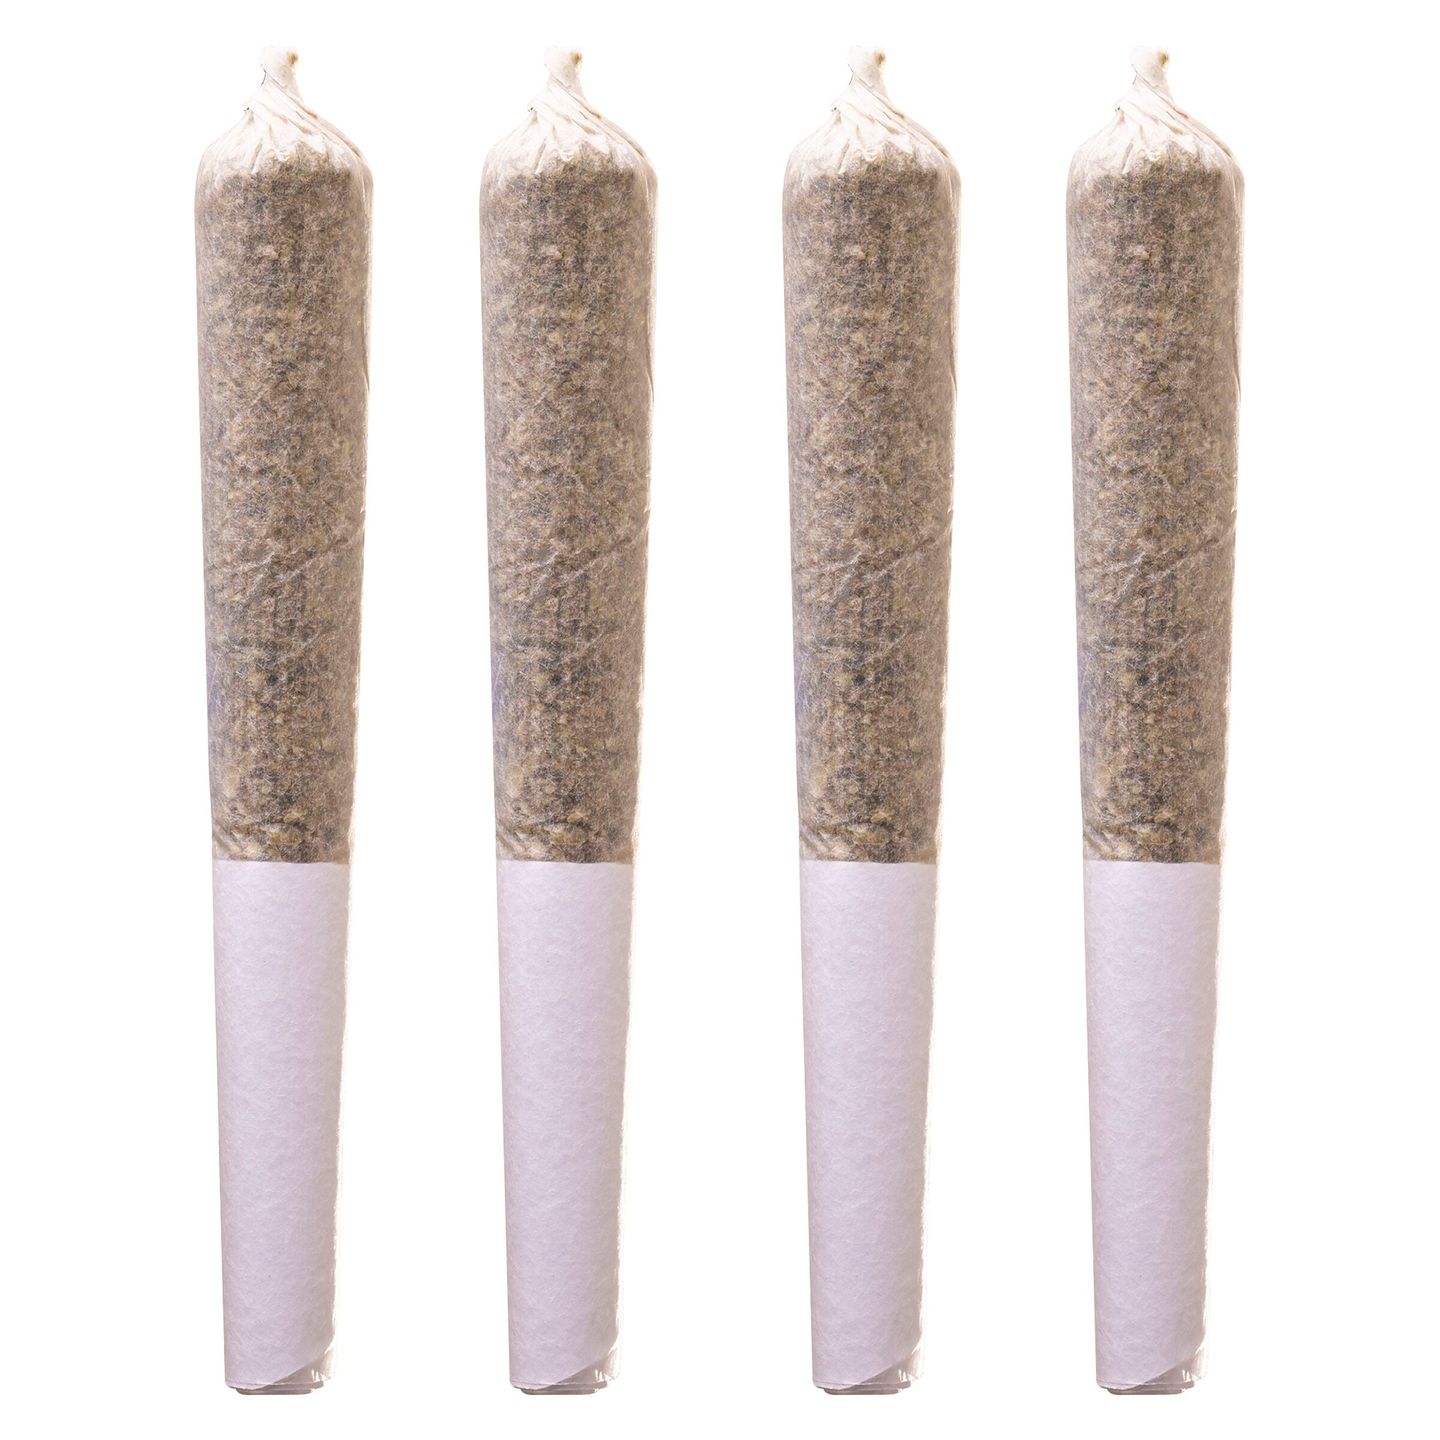 Cannabis Product Orange Layer Cake Pre-Rolls by Potluck